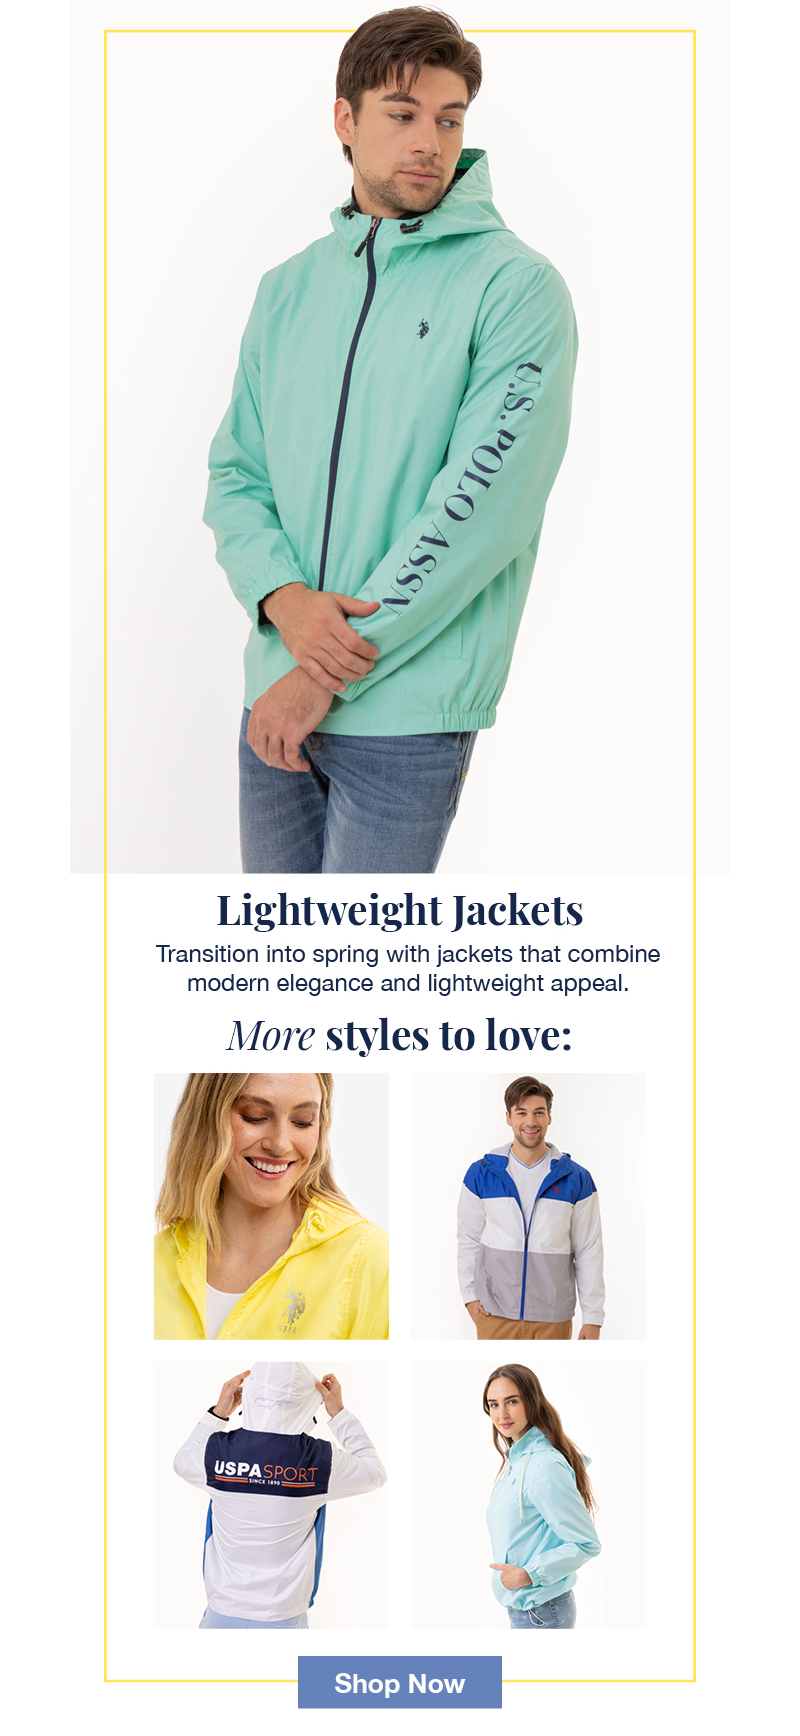 Lightweight Jackets: Transition into spring with jackets that combine modern elegance and lightweight appeal. More styles to love: hop now